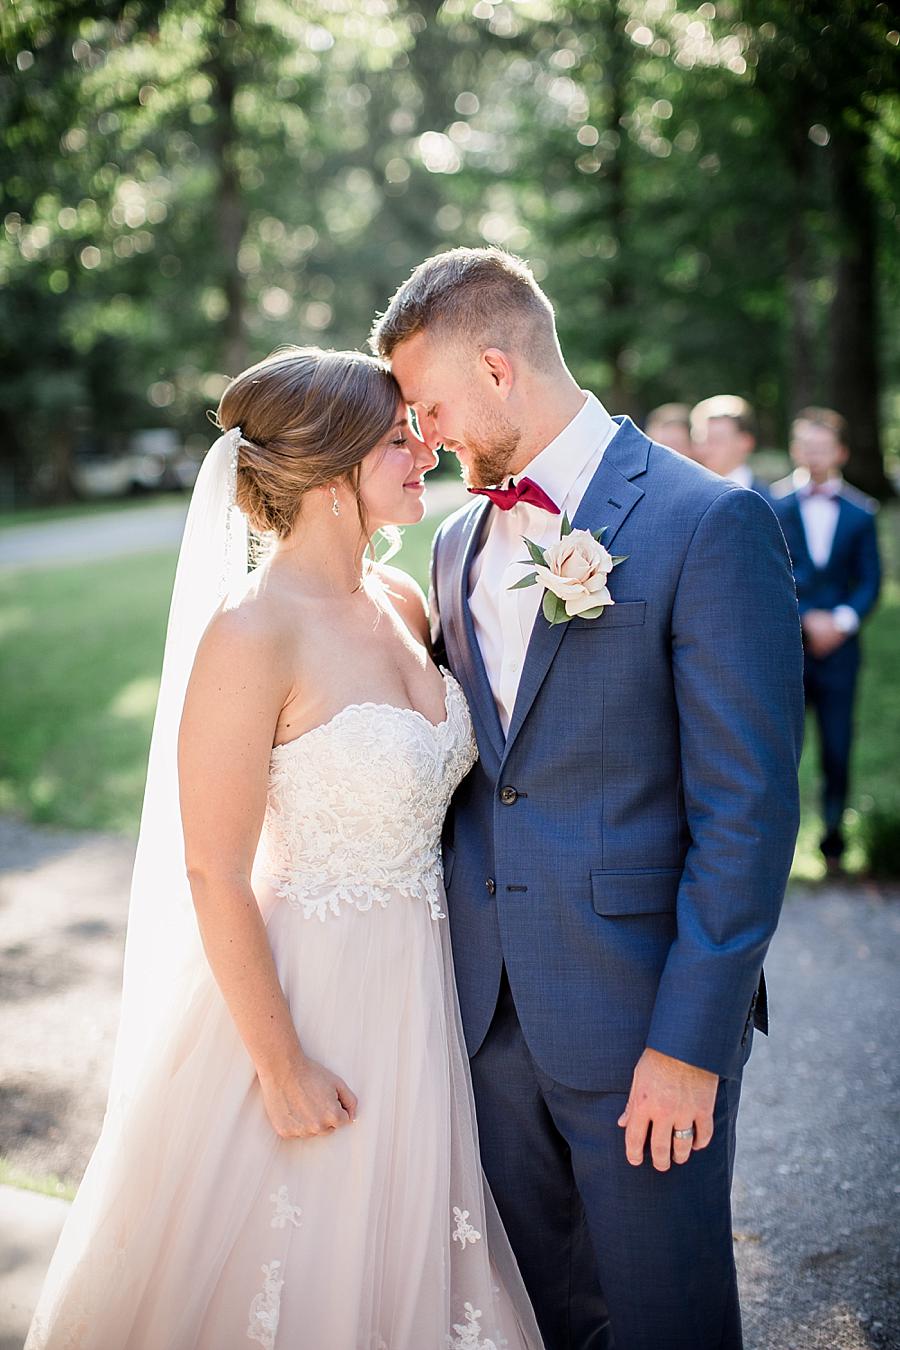 Forehead to forehead at this RiverView Family Farm Wedding by Knoxville Wedding Photographer, Amanda May Photos.